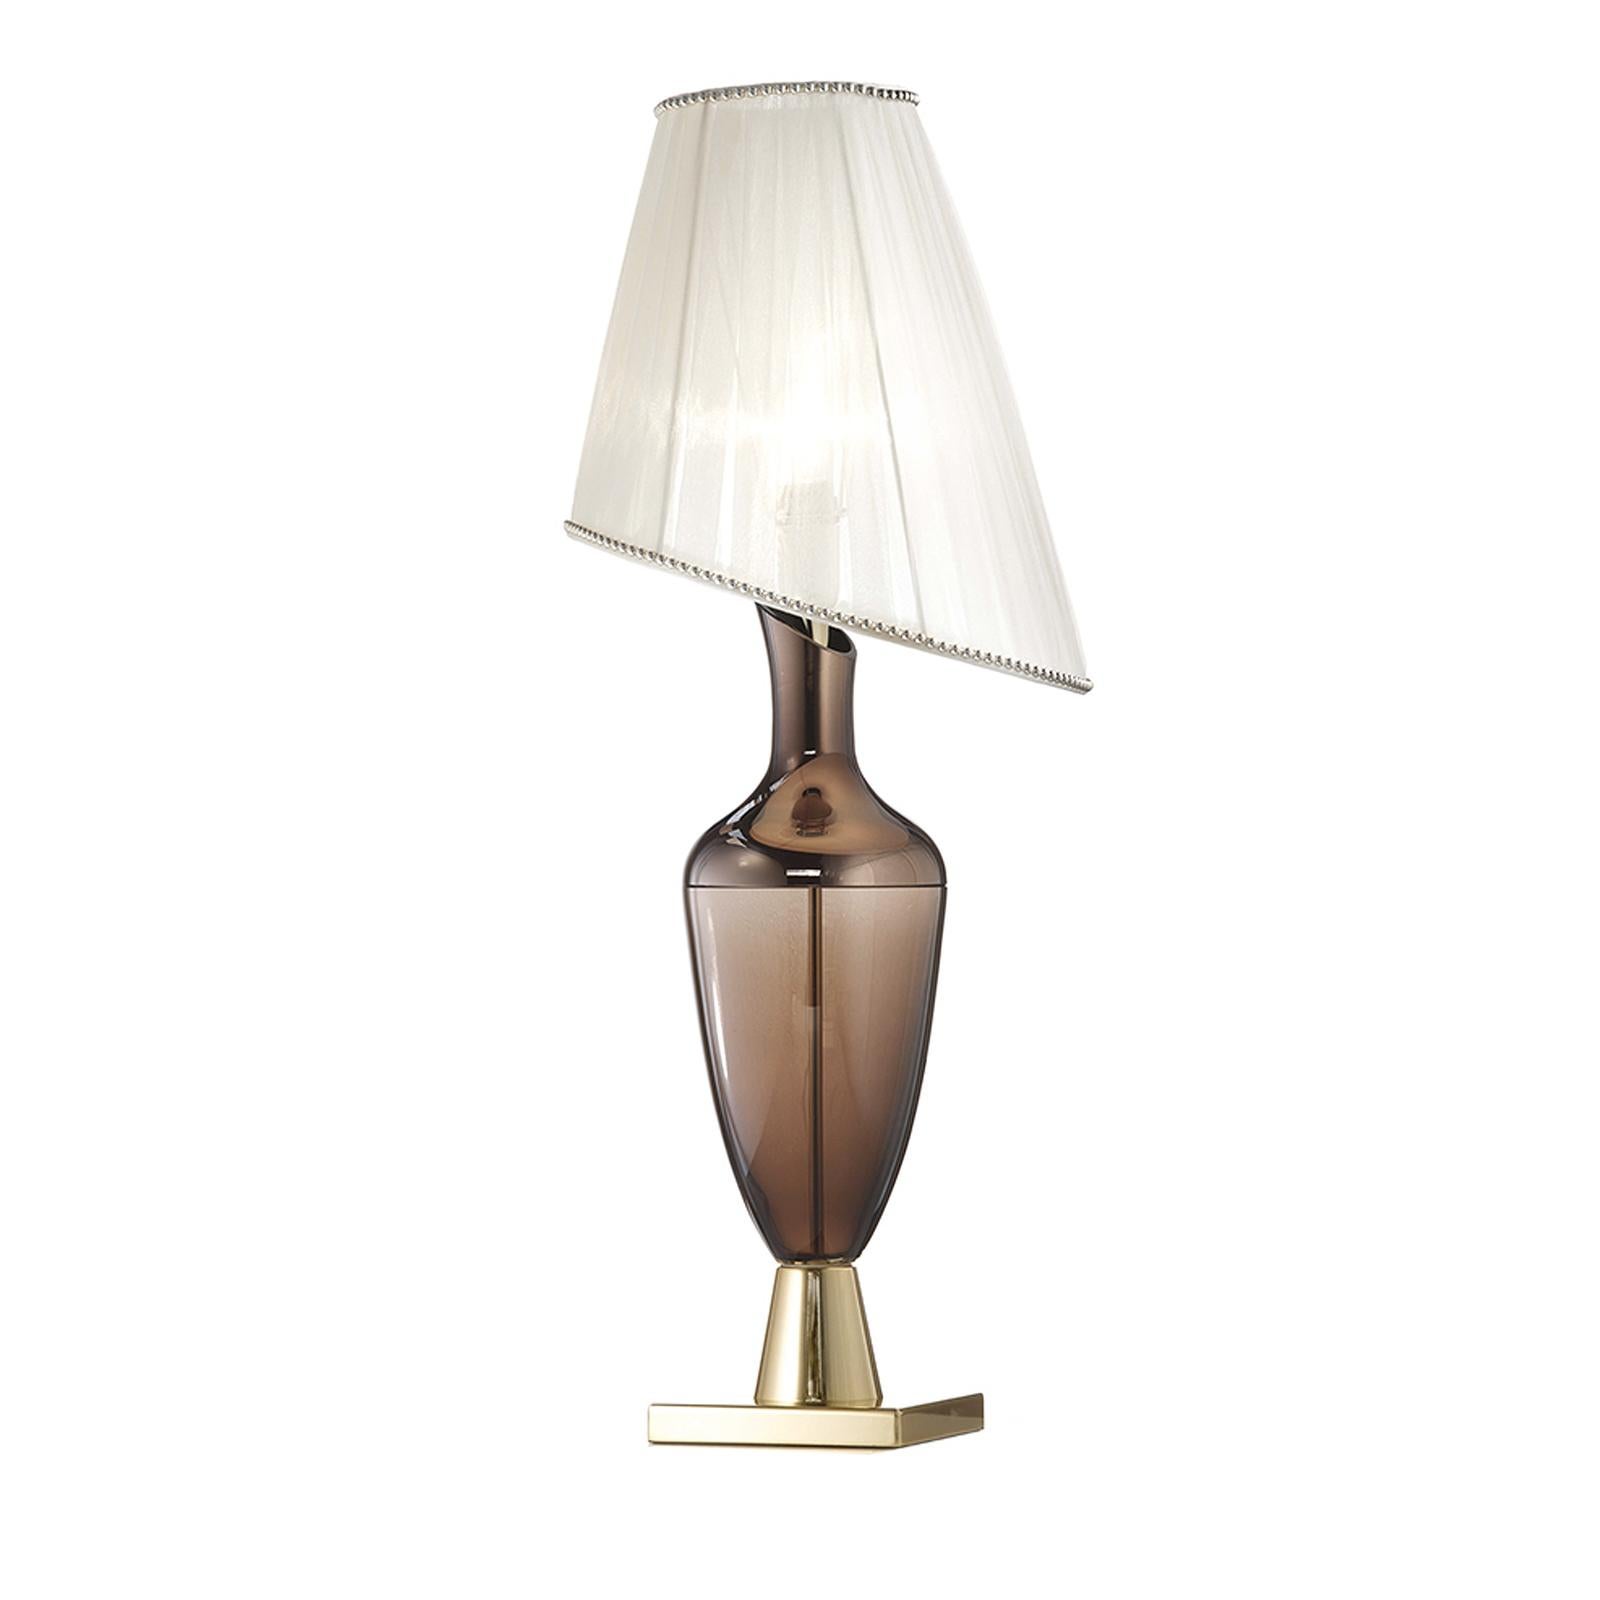 Part of the Lady collection, this elegant and modern table lamp will make a statement in an entryway, a living room, and even a bedroom atop a nightstand. Its asymmetrical lampshade screens a single E27 x 60W lightbulb, supported by an exquisite